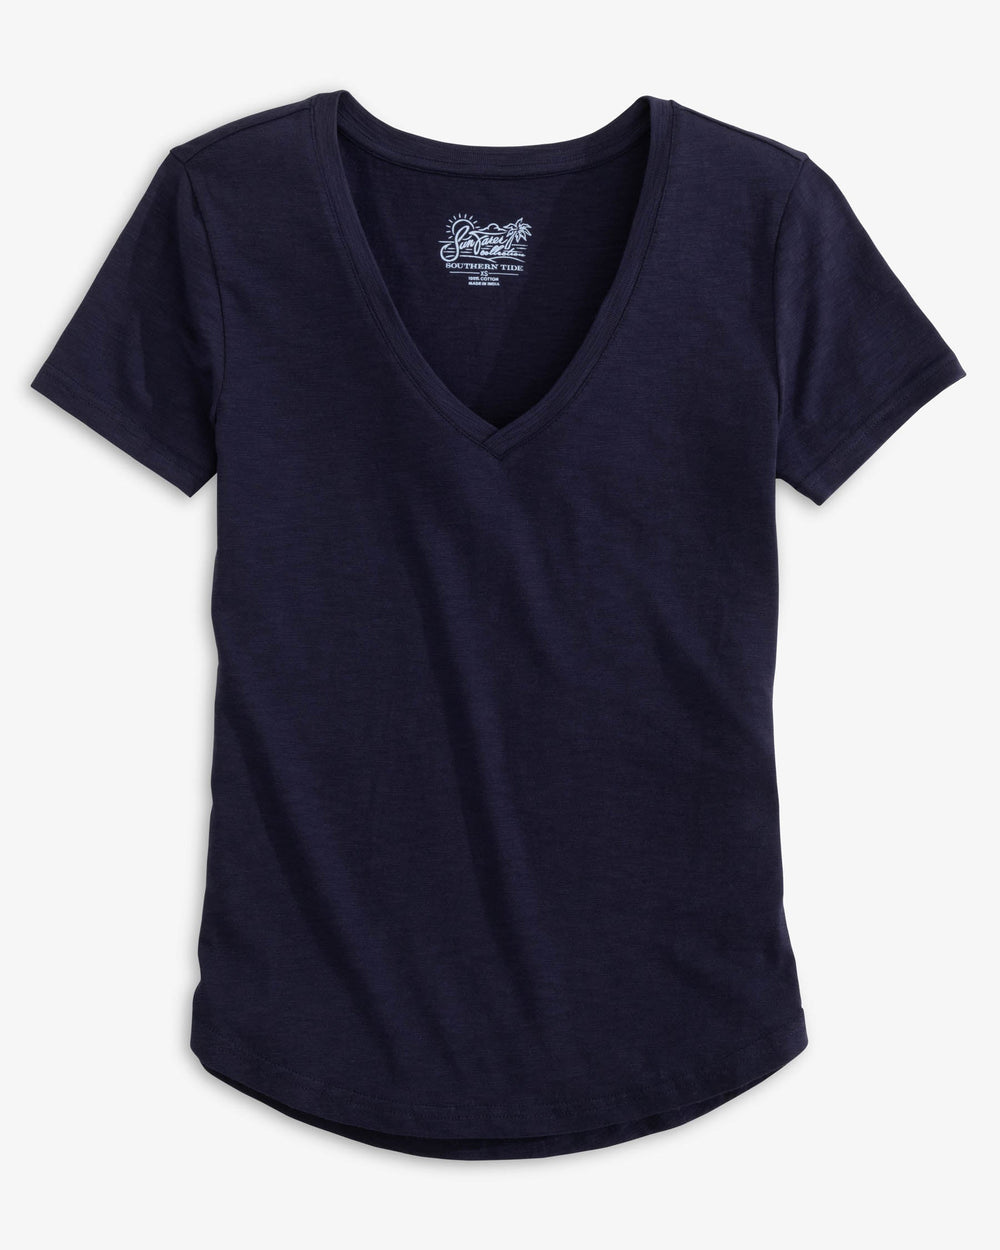 The front view of the Audrey Sun Farer Short Sleeve T-shirt by Southern Tide - Nautical Navy